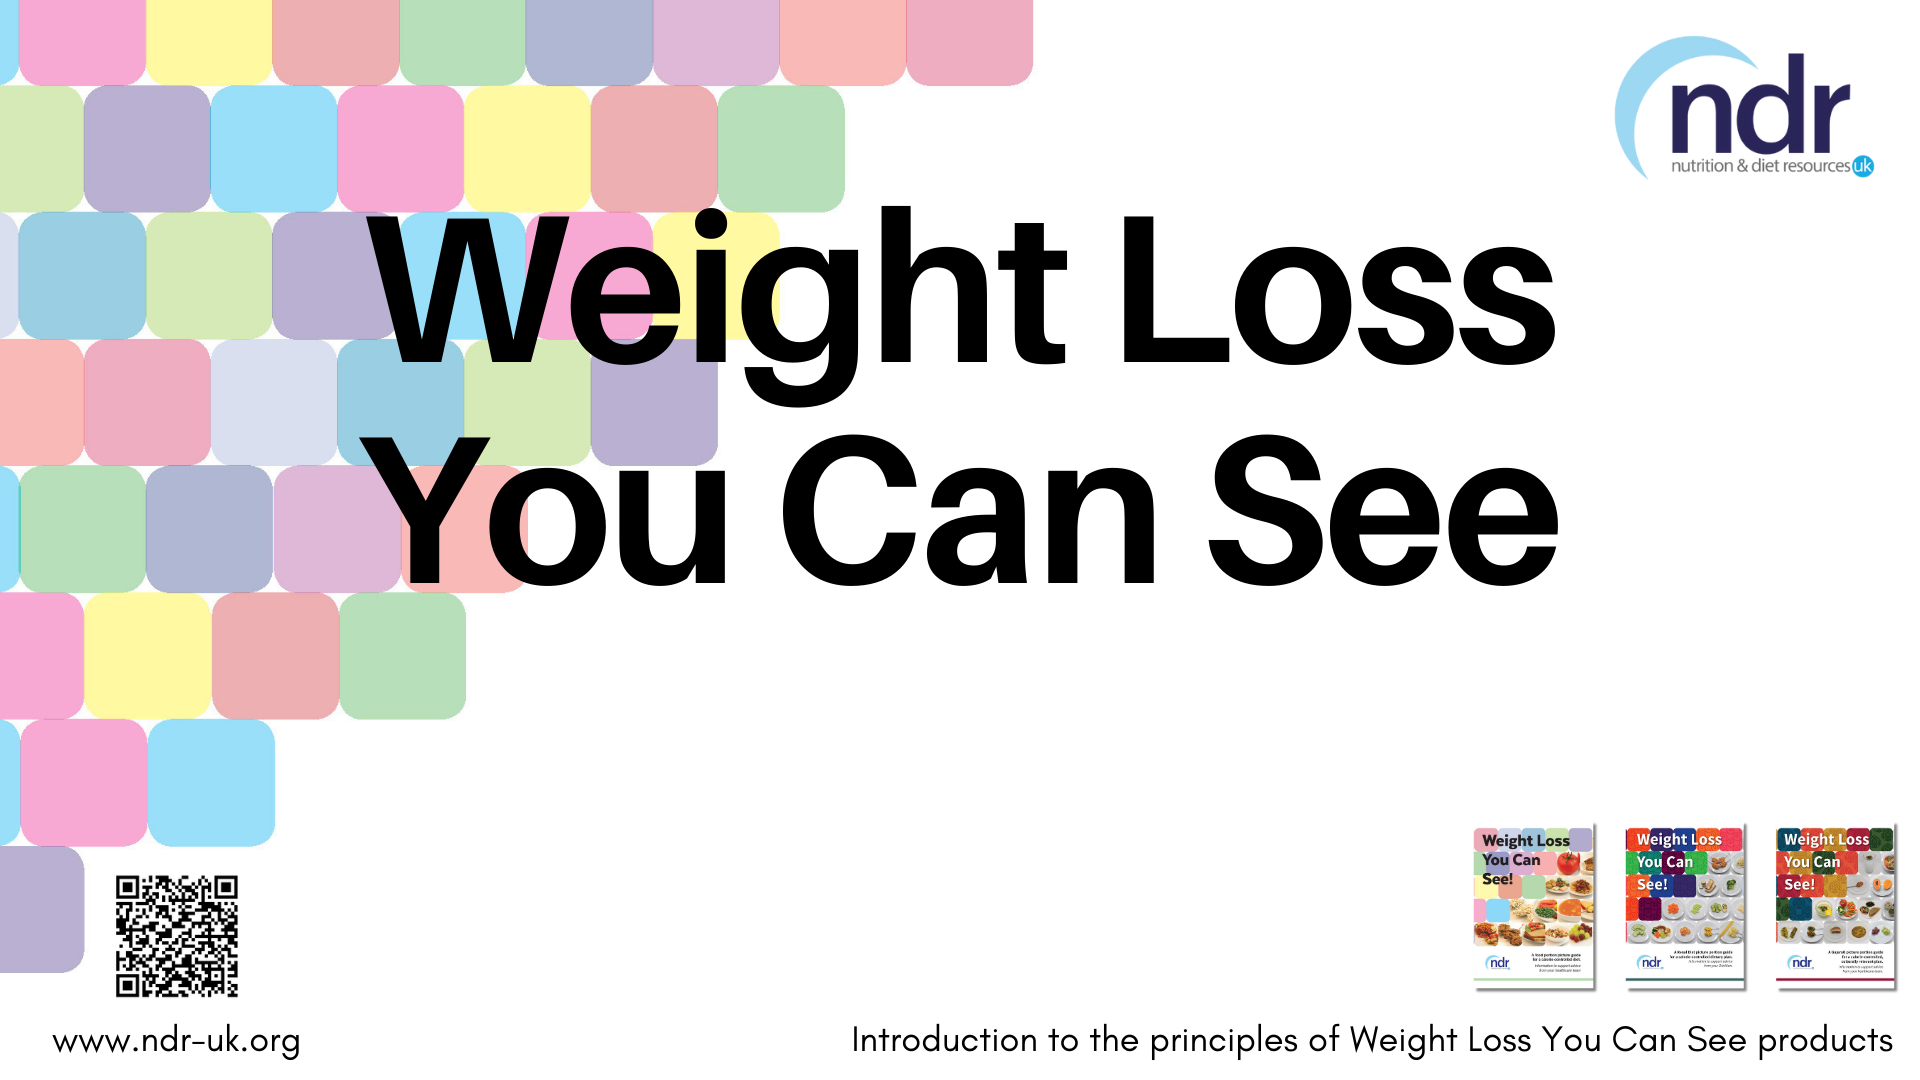 An Introduction to 'Weight Loss You Can See'